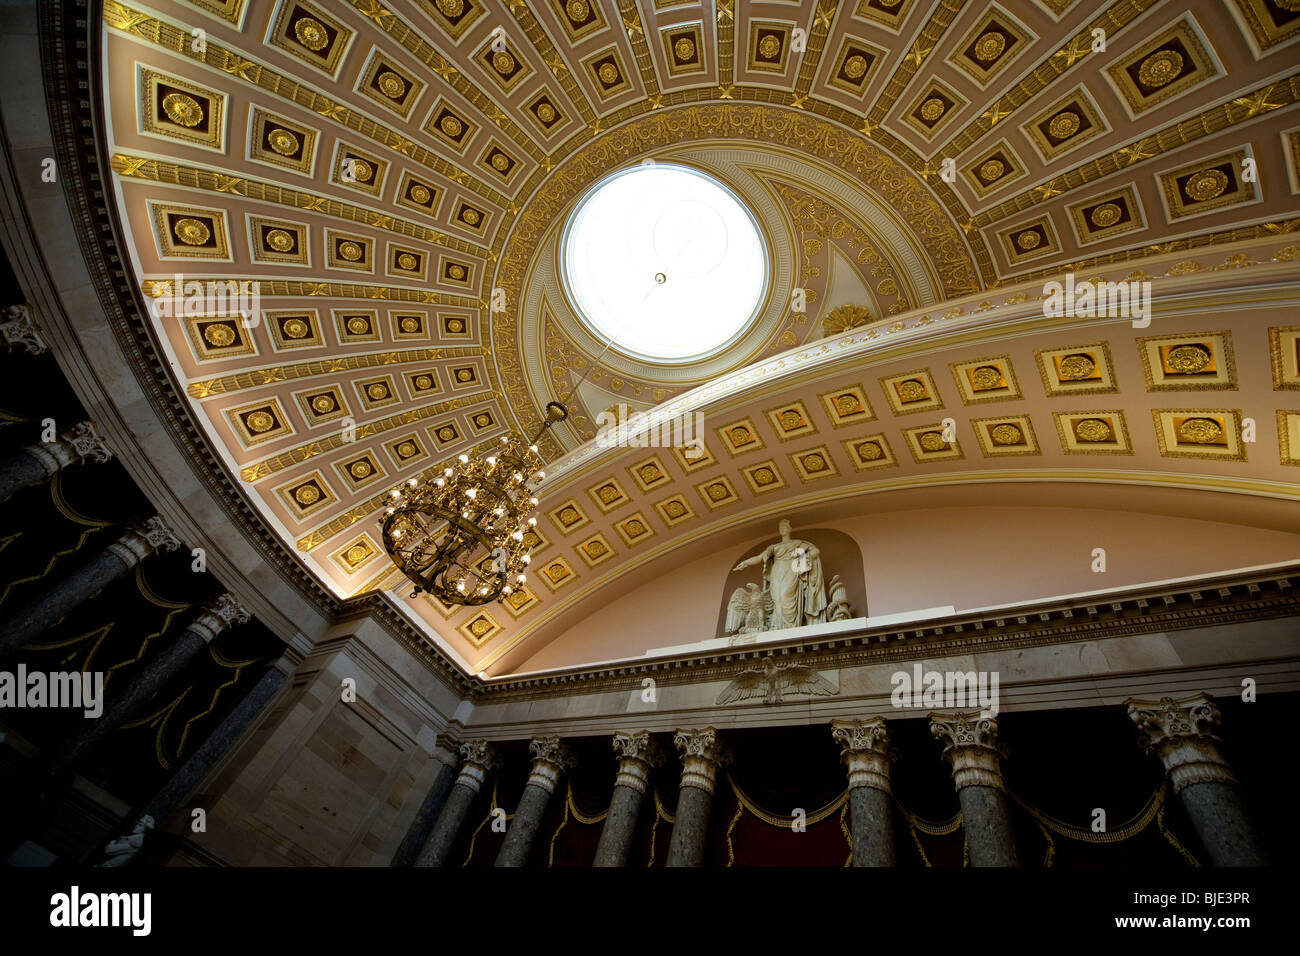 The ceiling of the Statue Room in the United States Capitol Building in Washington D.C USA Stock Photo